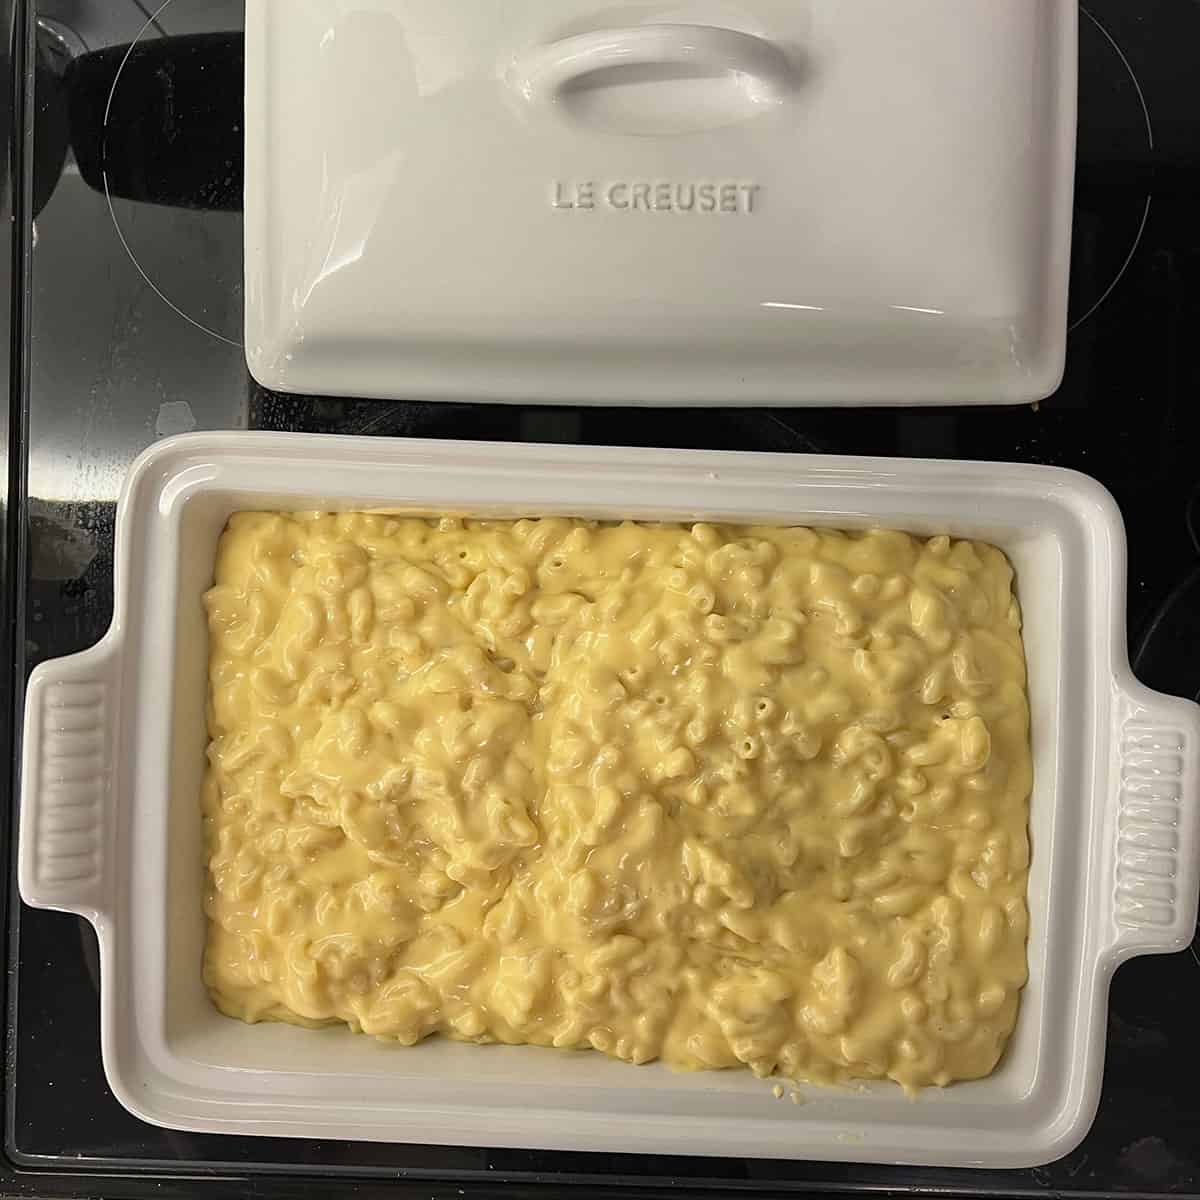 Le creuset dish with mac n cheese in it.